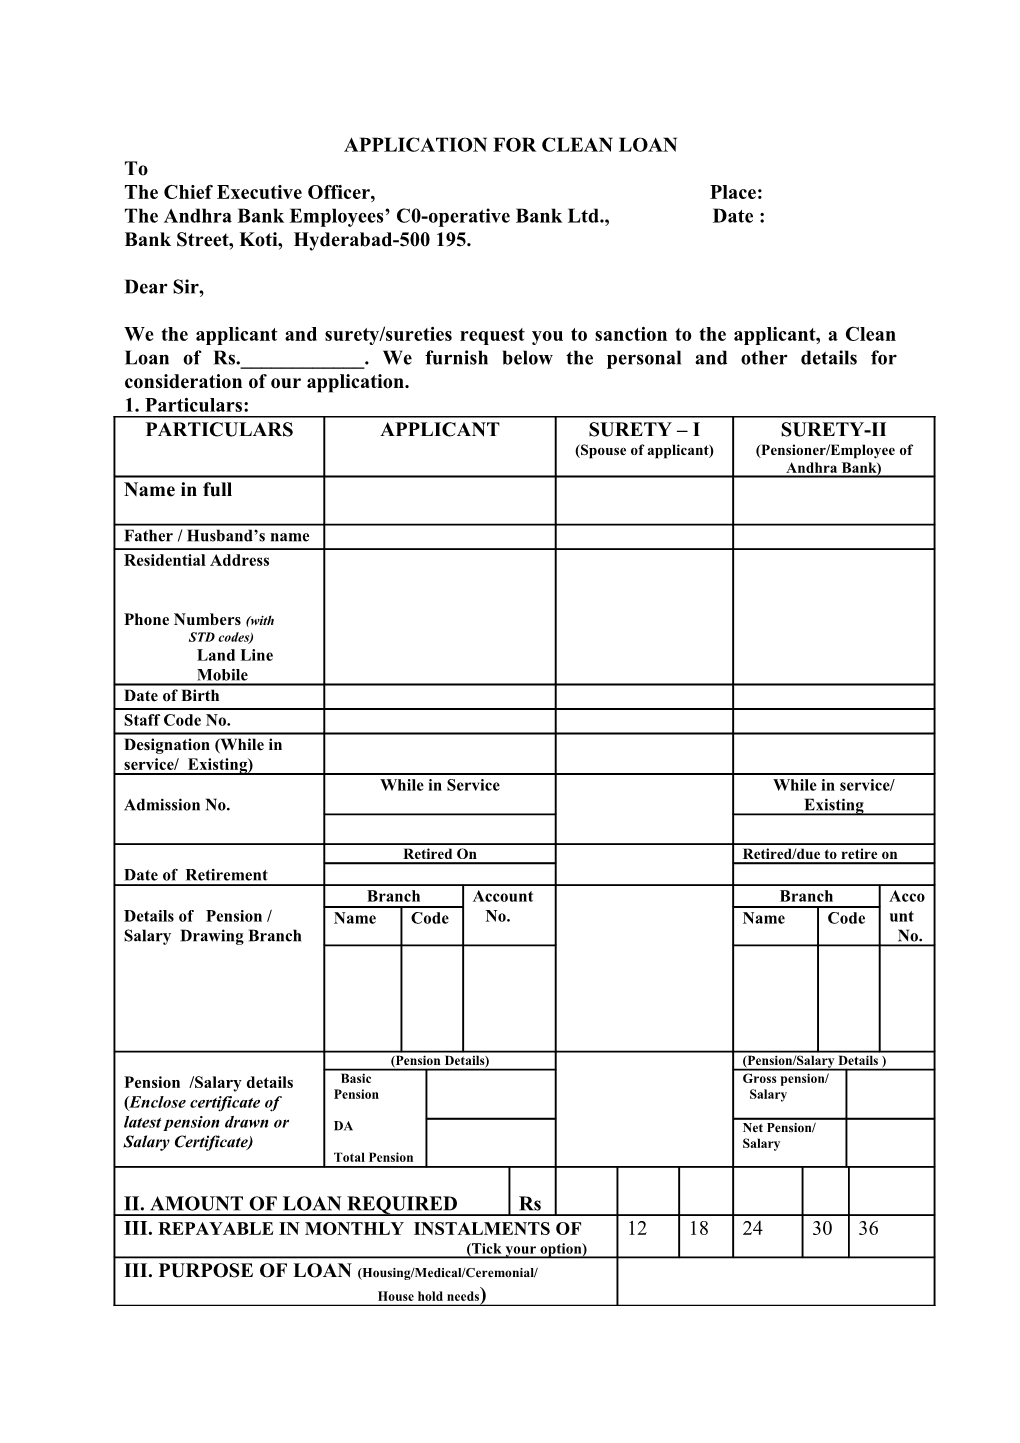 Application for Clean Loan